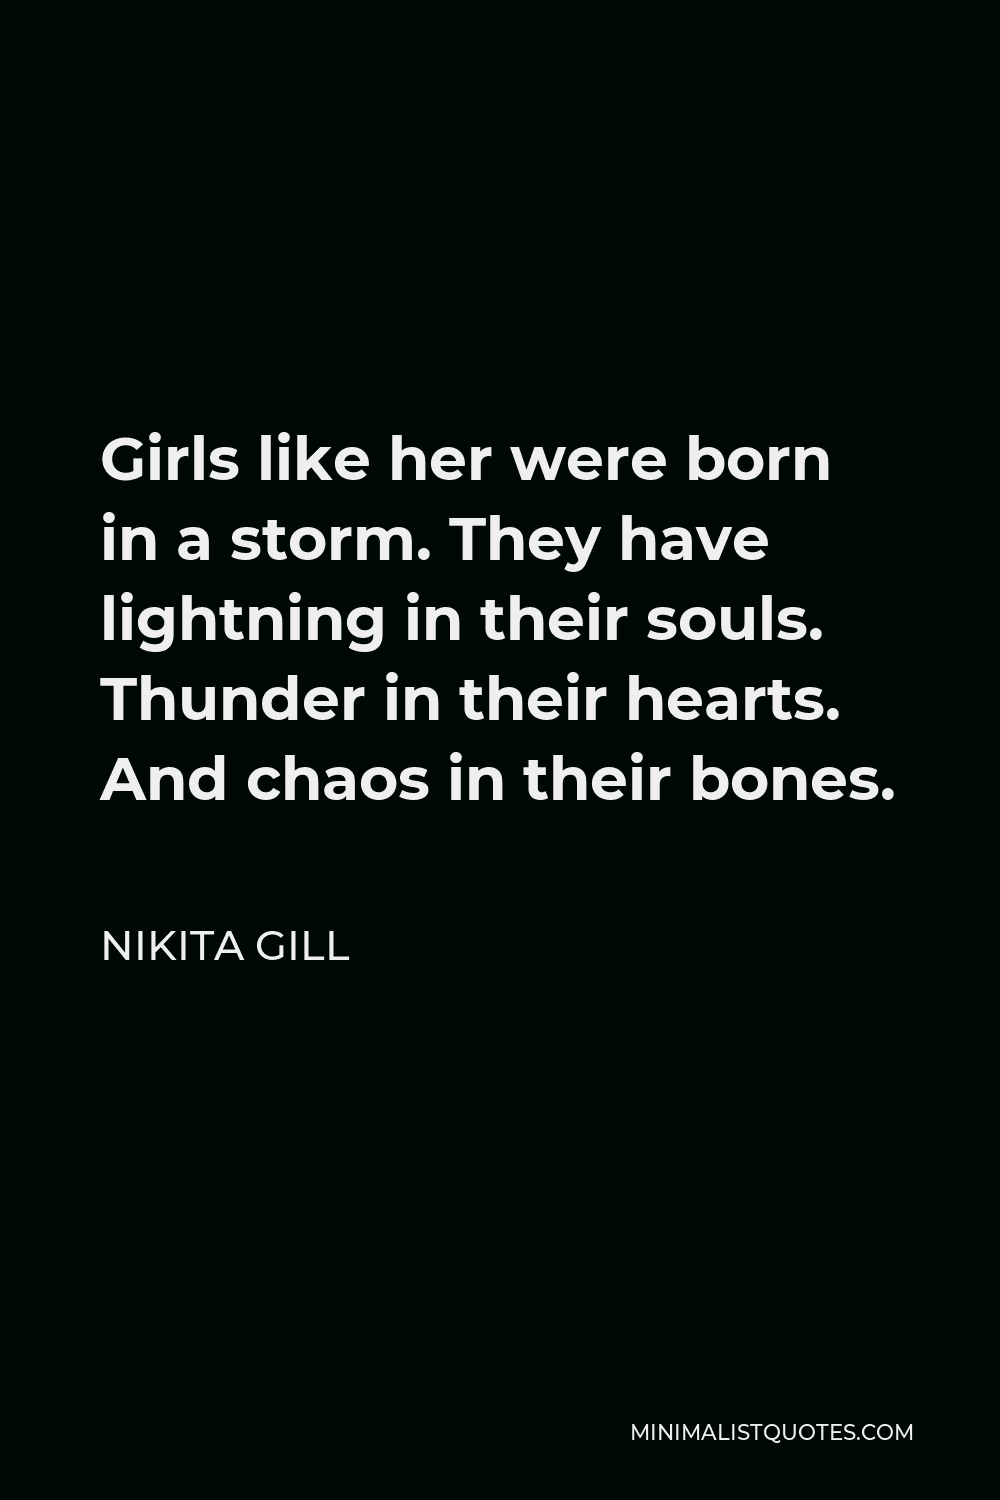 Nikita Gill Quote - Girls like her were born in a storm. They have lightning in their souls. Thunder in their hearts. And chaos in their bones.